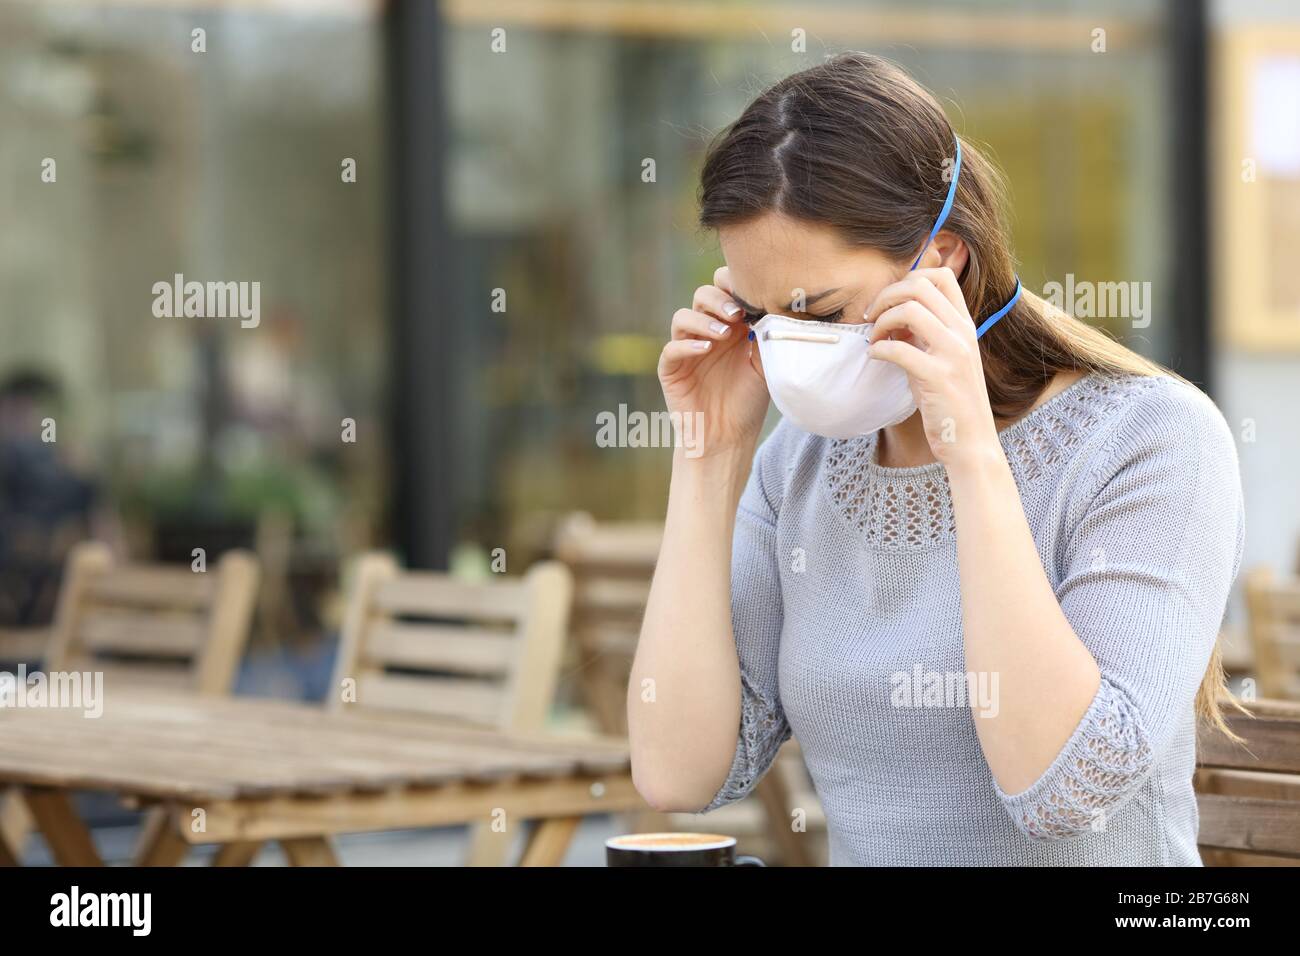 Serious woman putting on protective mask preventing contagion at coffee shop terrace Stock Photo